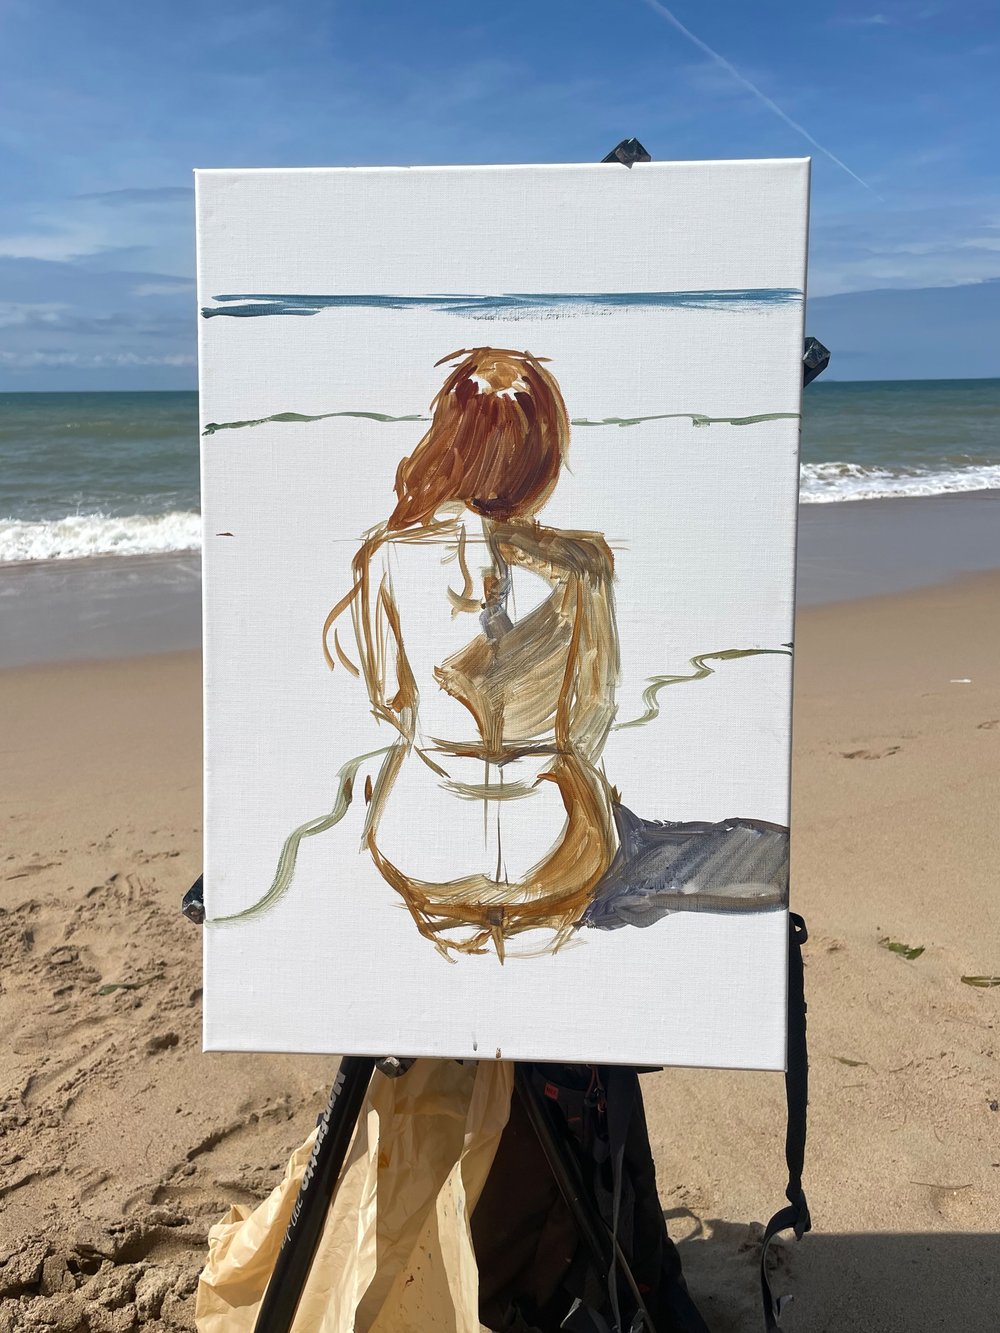 Start of a portrait of Marta kneeling in the surf. My one larger canvas of the trip